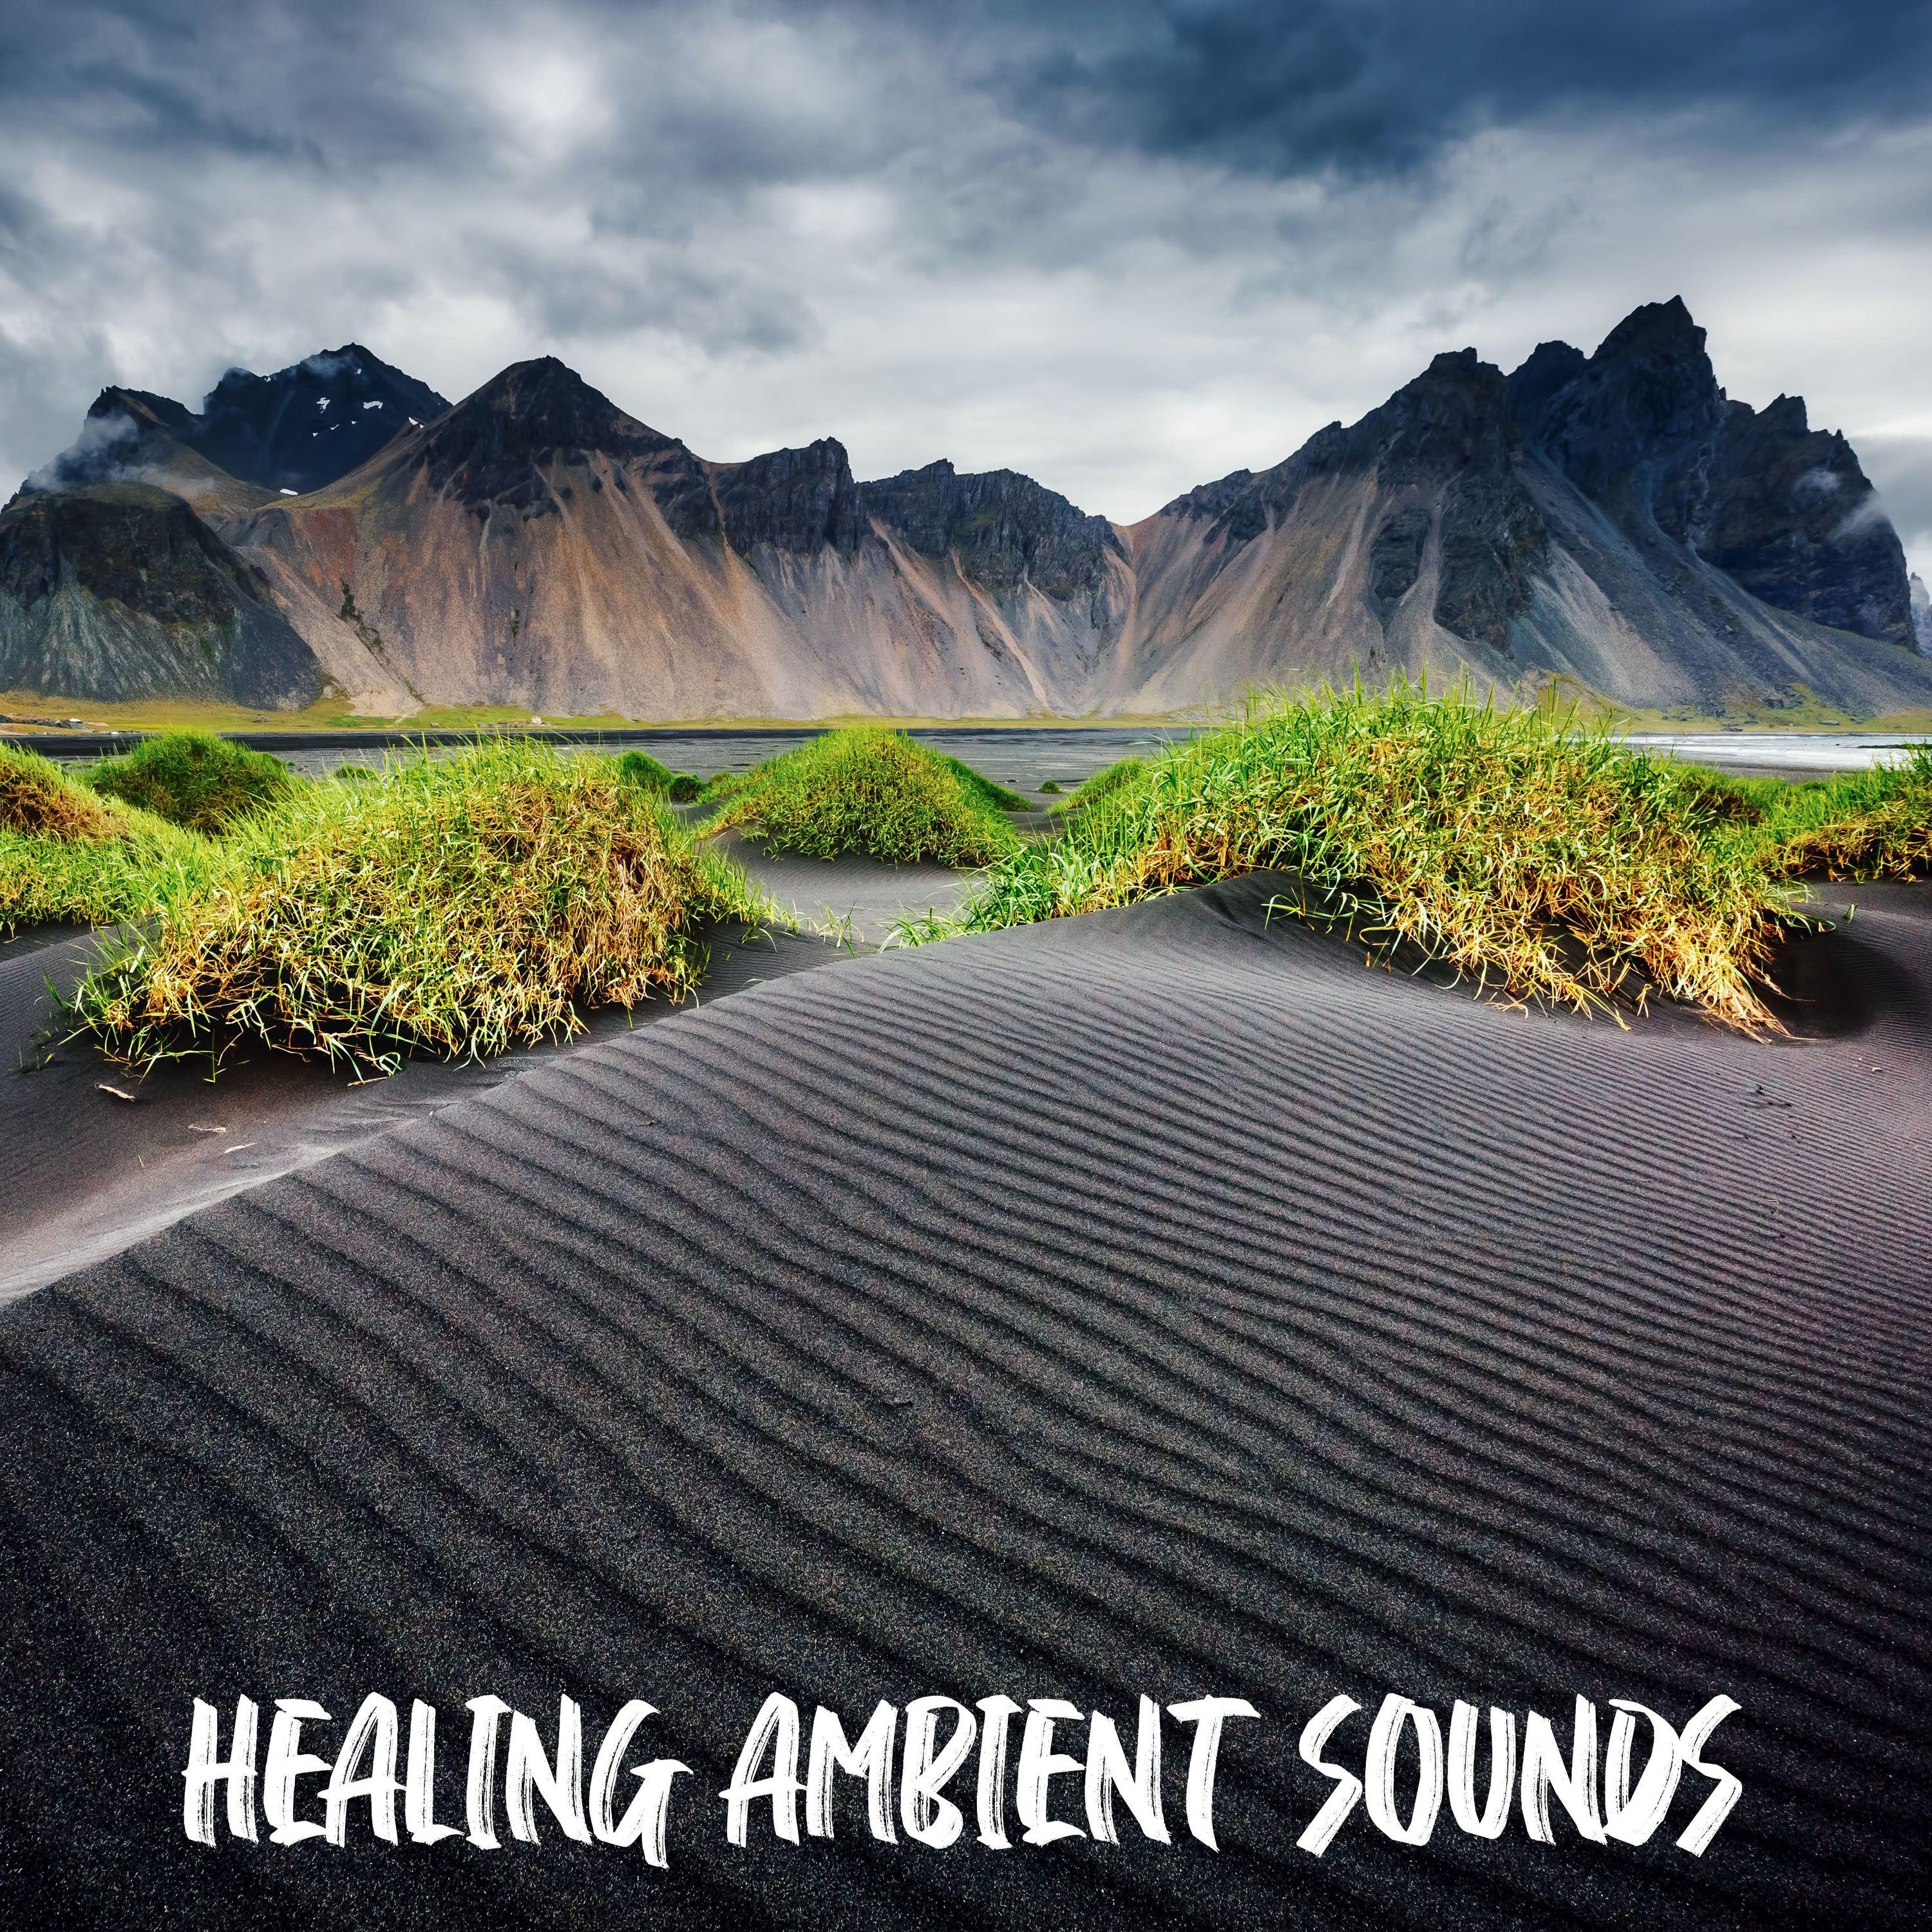 Healing Ambient Sounds